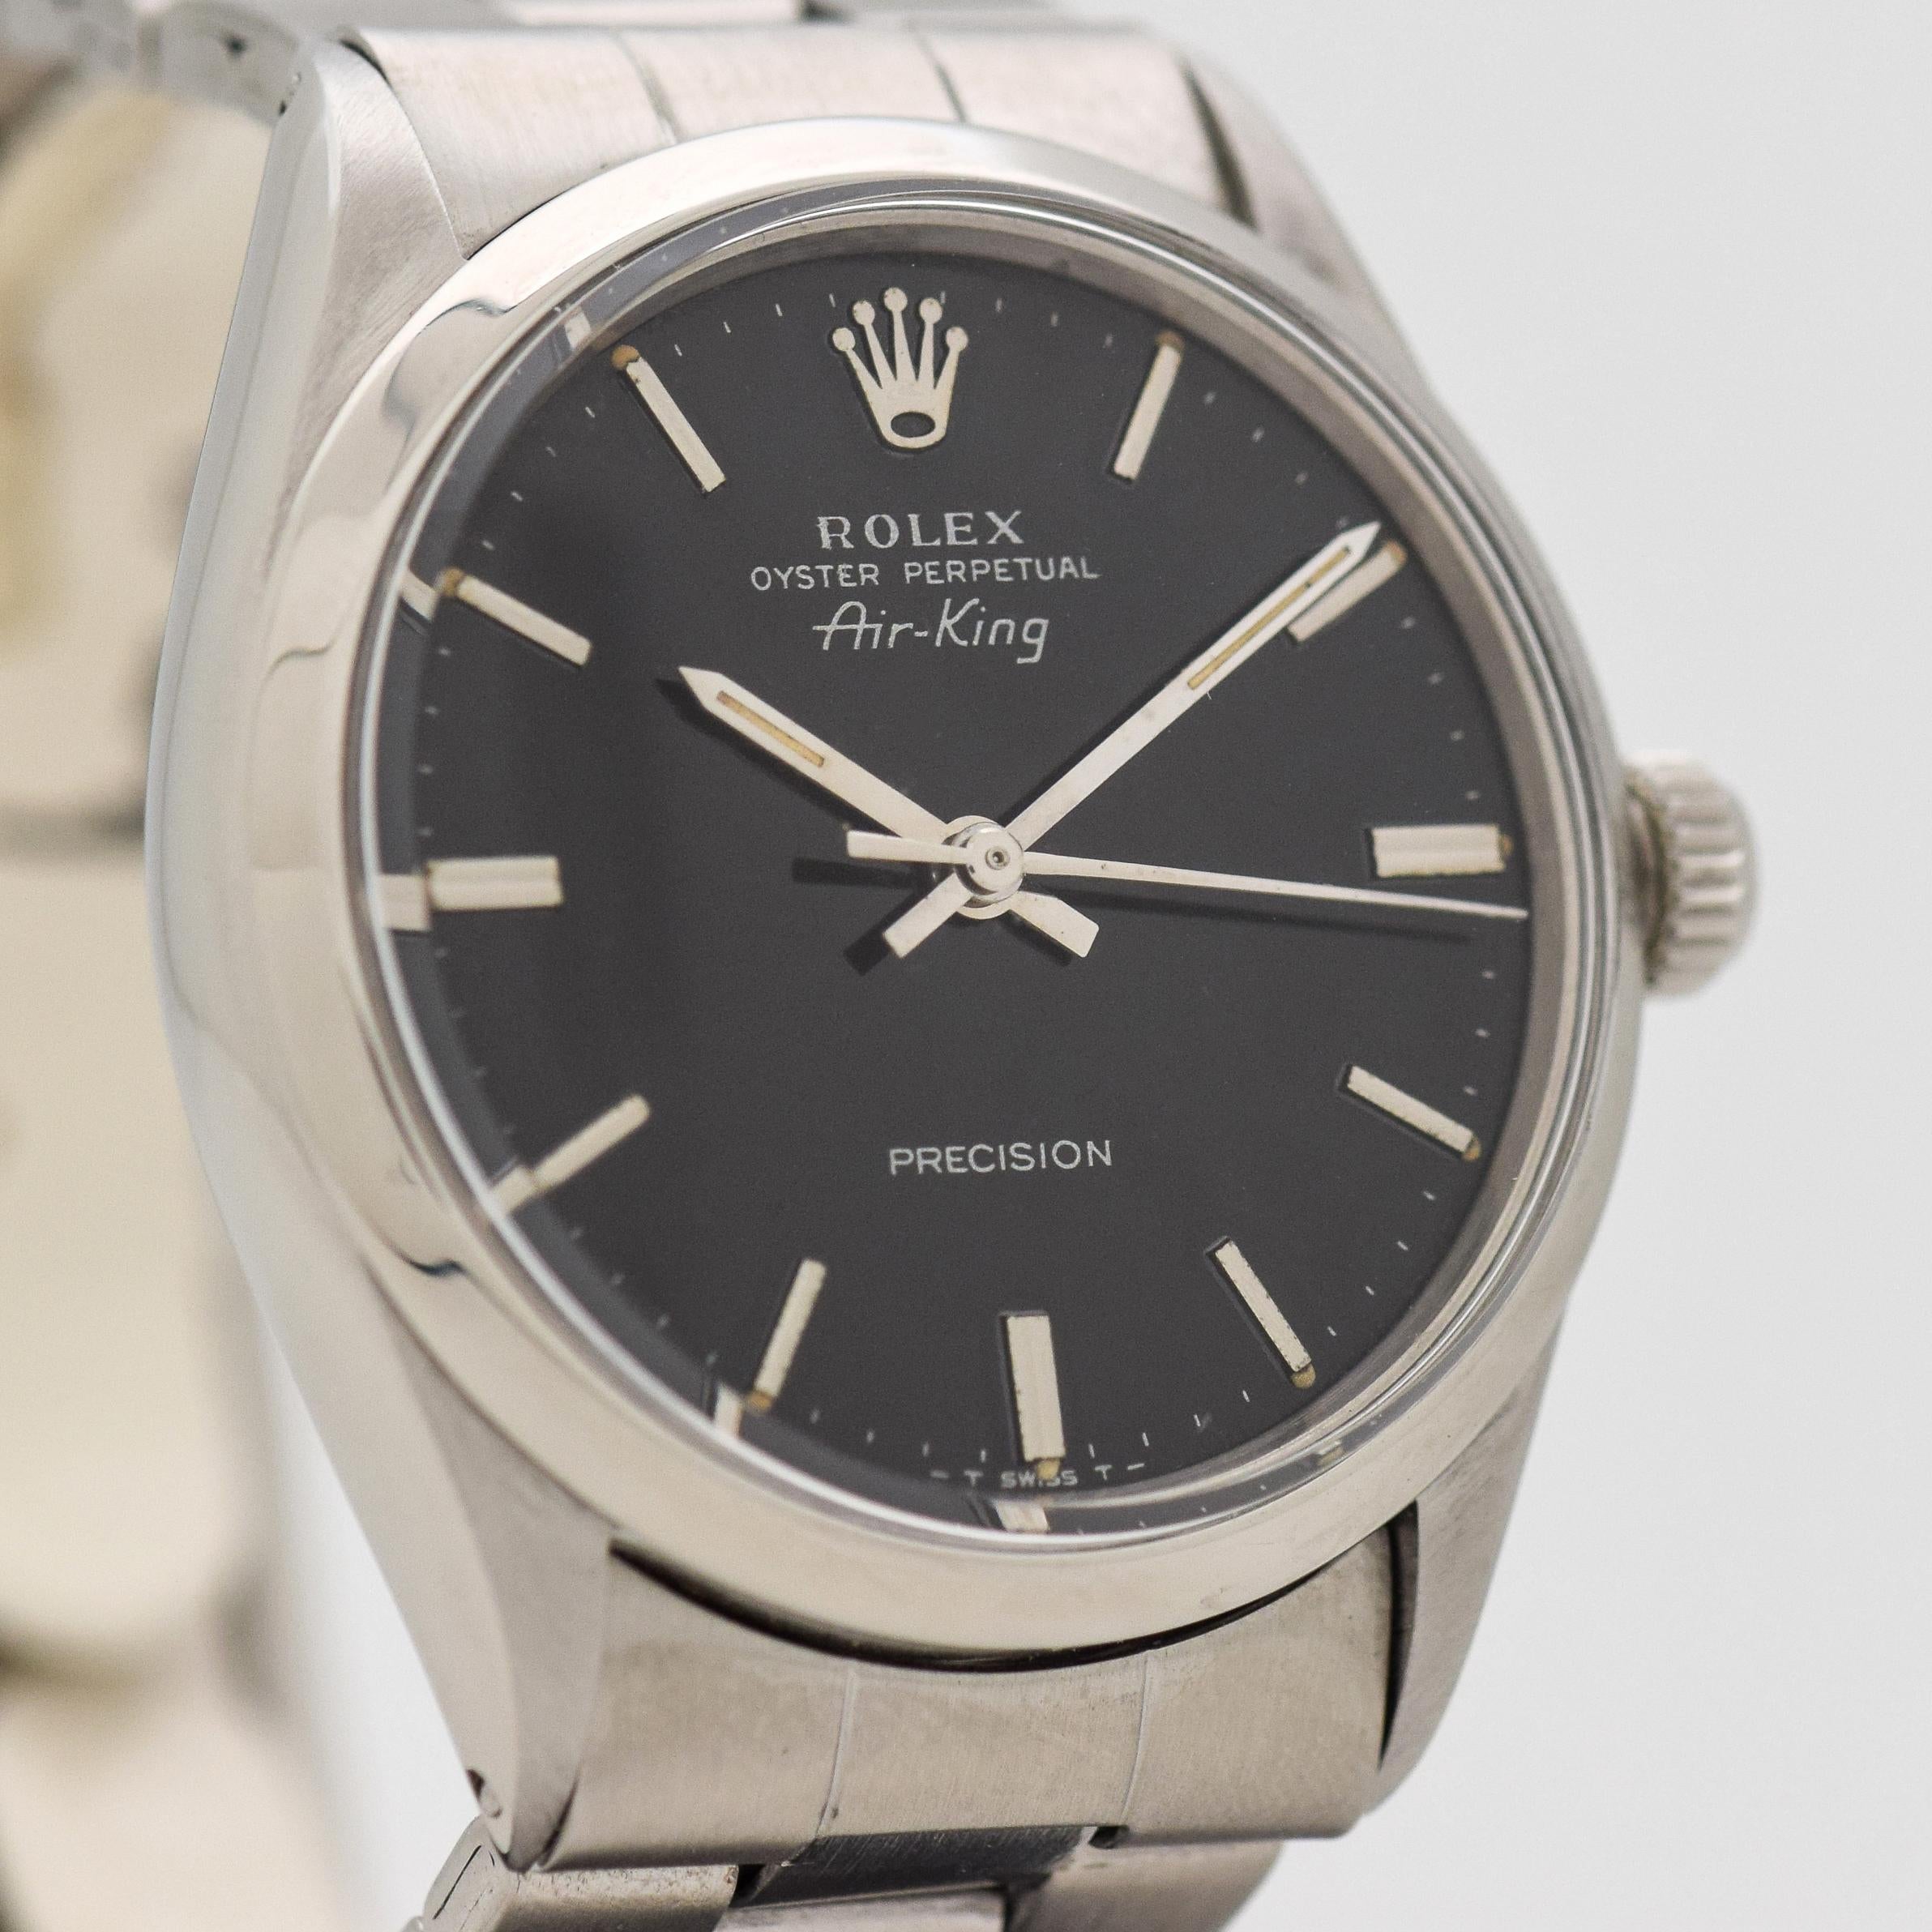 1970 Vintage Air-King Ref. 5500 Stainless Steel watch with Black Dial with Applied Steel Stick/Bar/Baton Markers with Original Rolex Stainless Steel Oyster Bracelet.  Triple Signed.  Fits up to a 6 1/4 Inch Wrist, Suited for a Smaller Wrist. A Watch